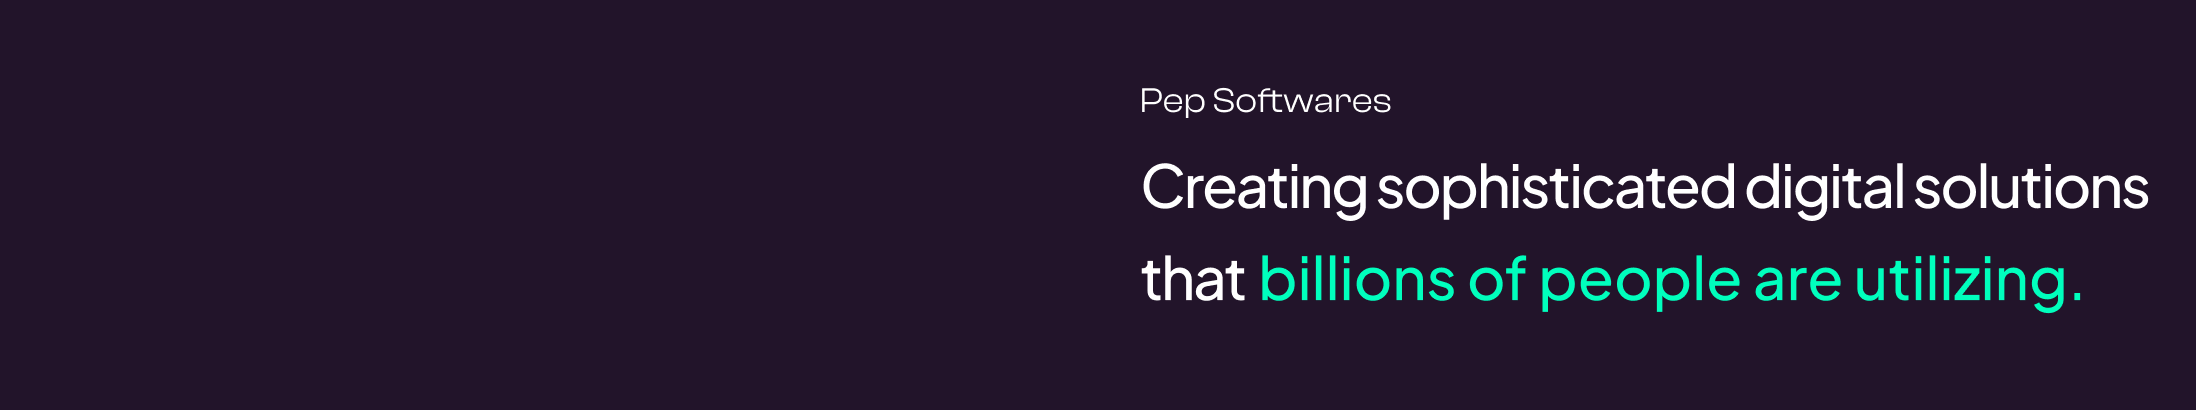 Pep Softwares's profile banner